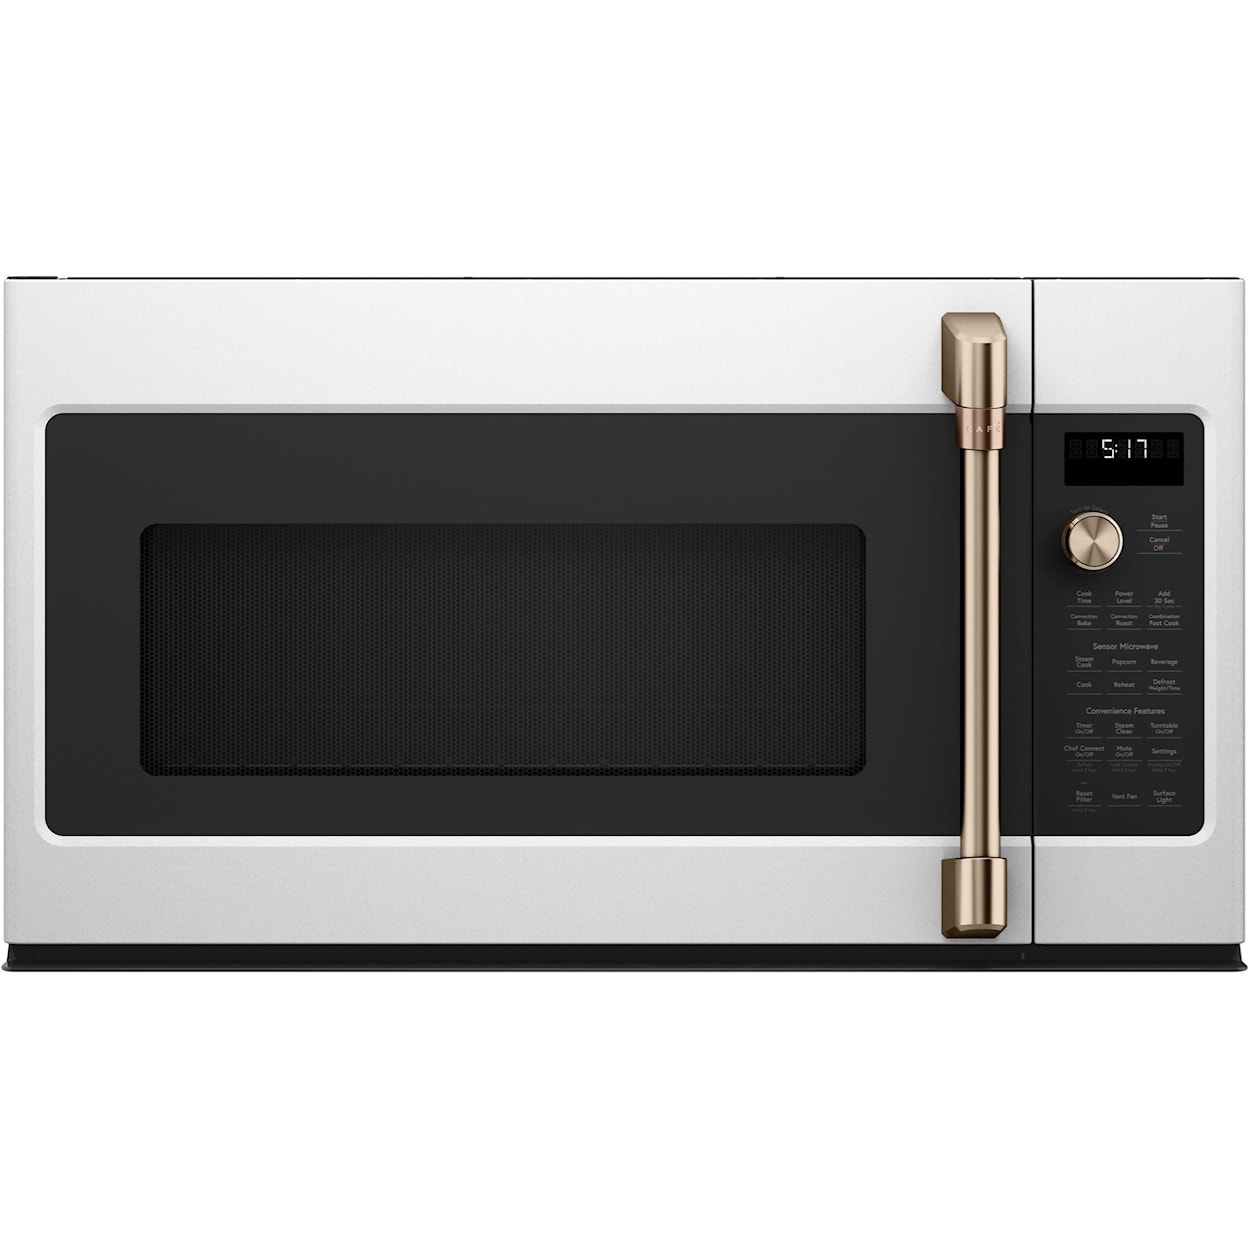 GE Appliances GE Cafe´ Microwave Oven Cafe´™ 1.7 Cu. Ft. Convection Microwave Oven